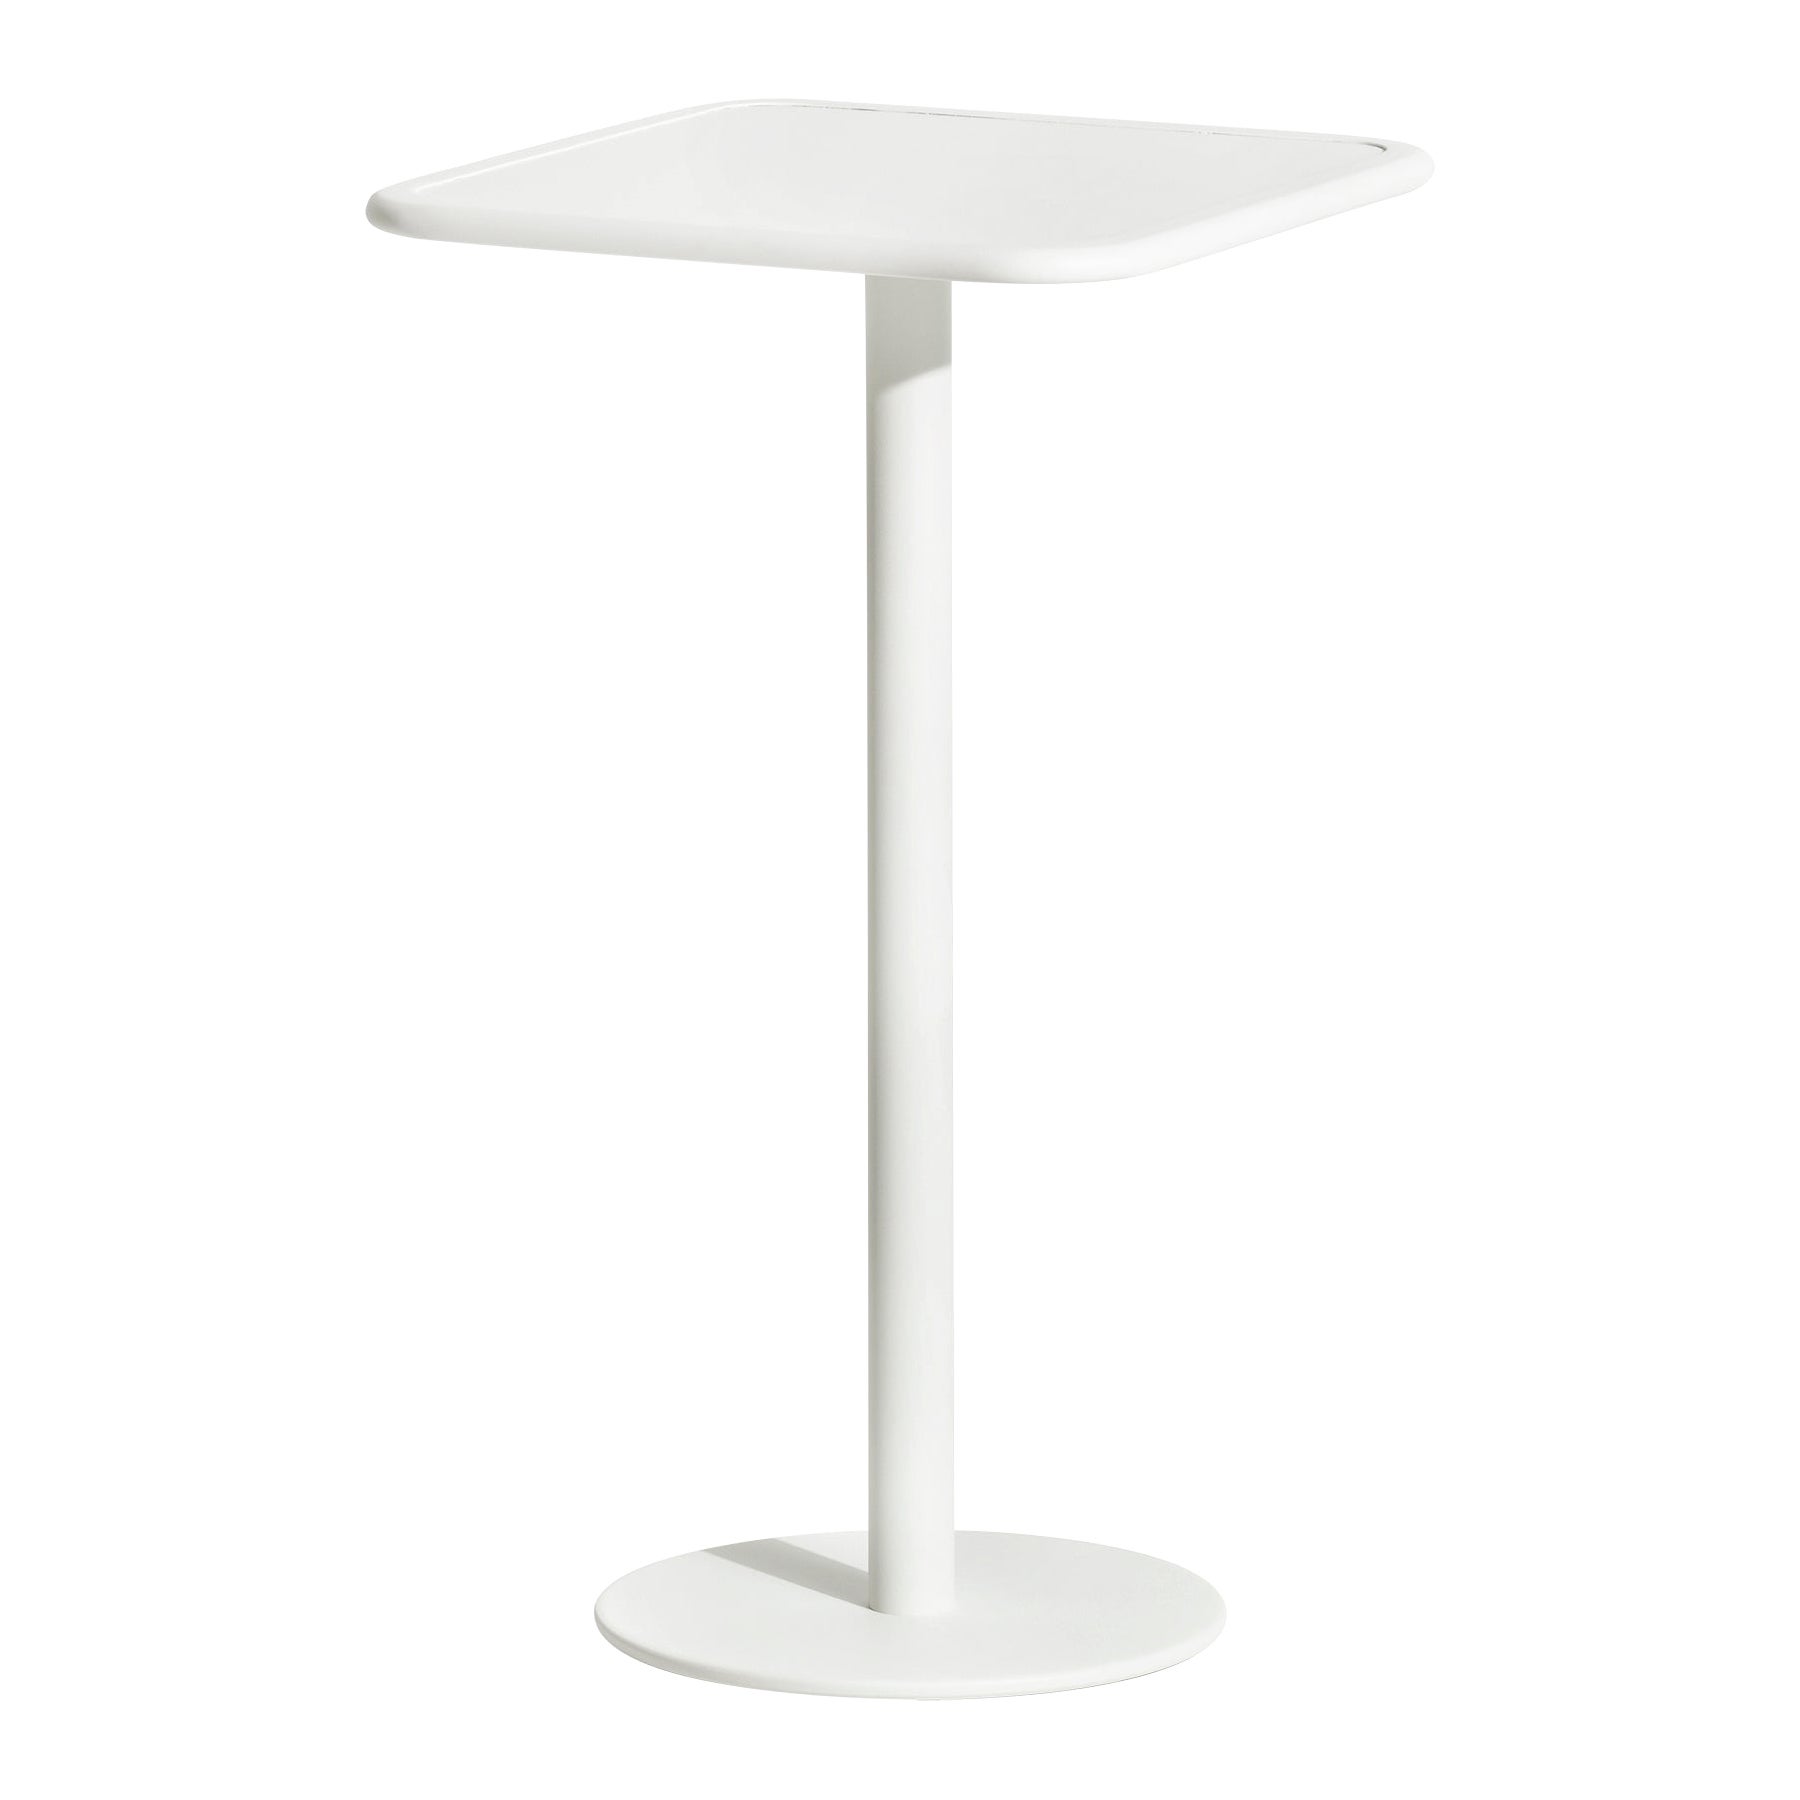 Petite Friture Week-End Square High Table in White Aluminium, 2017